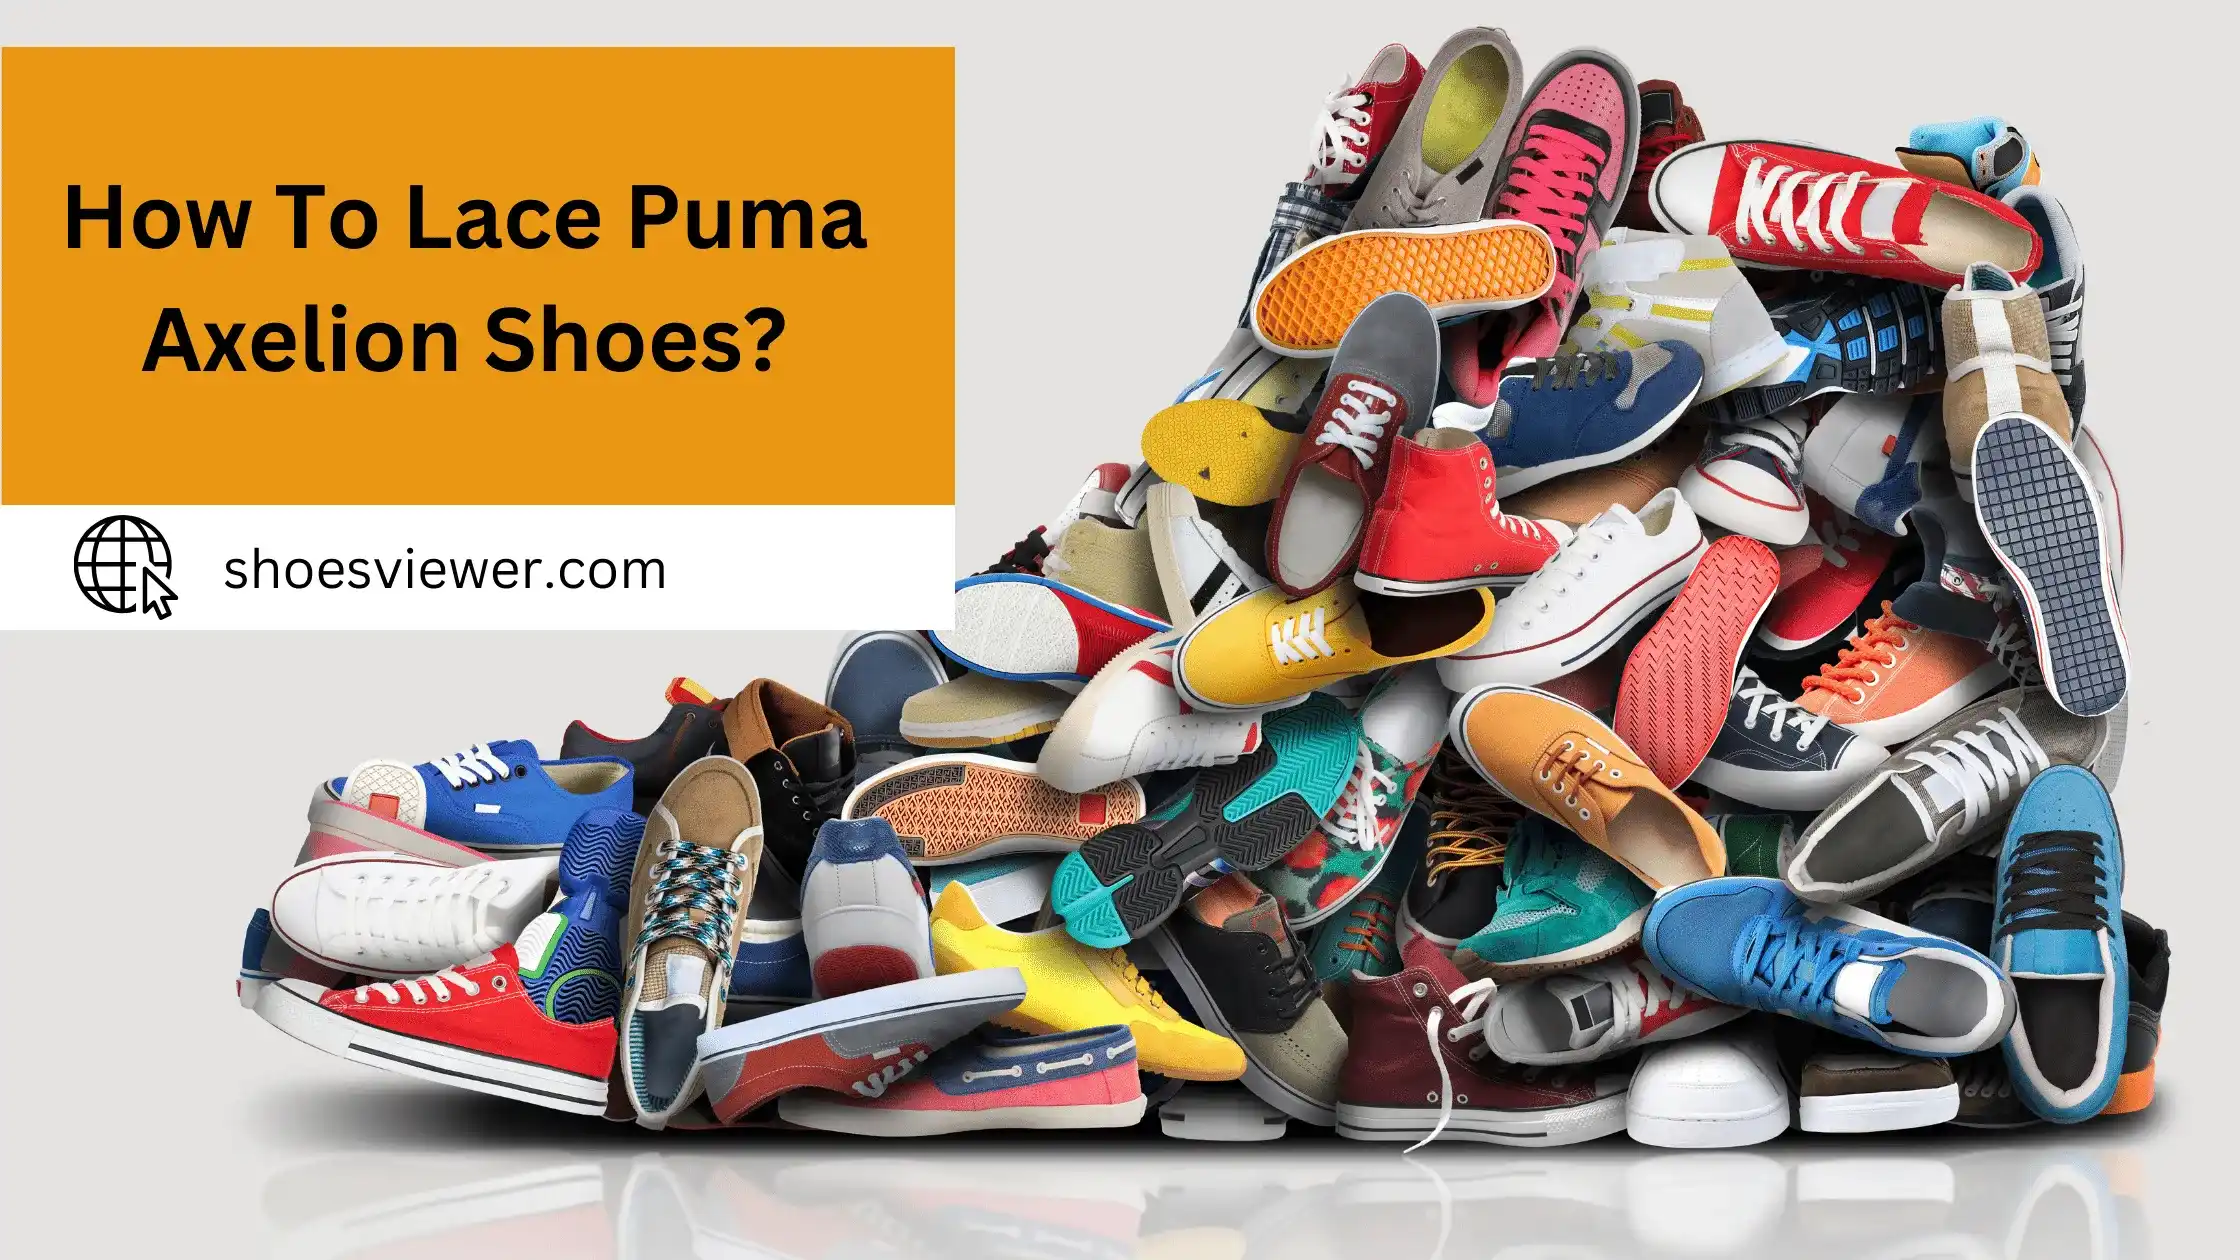 How To Lace Puma Axelion Shoes? Quick and Effective Tips